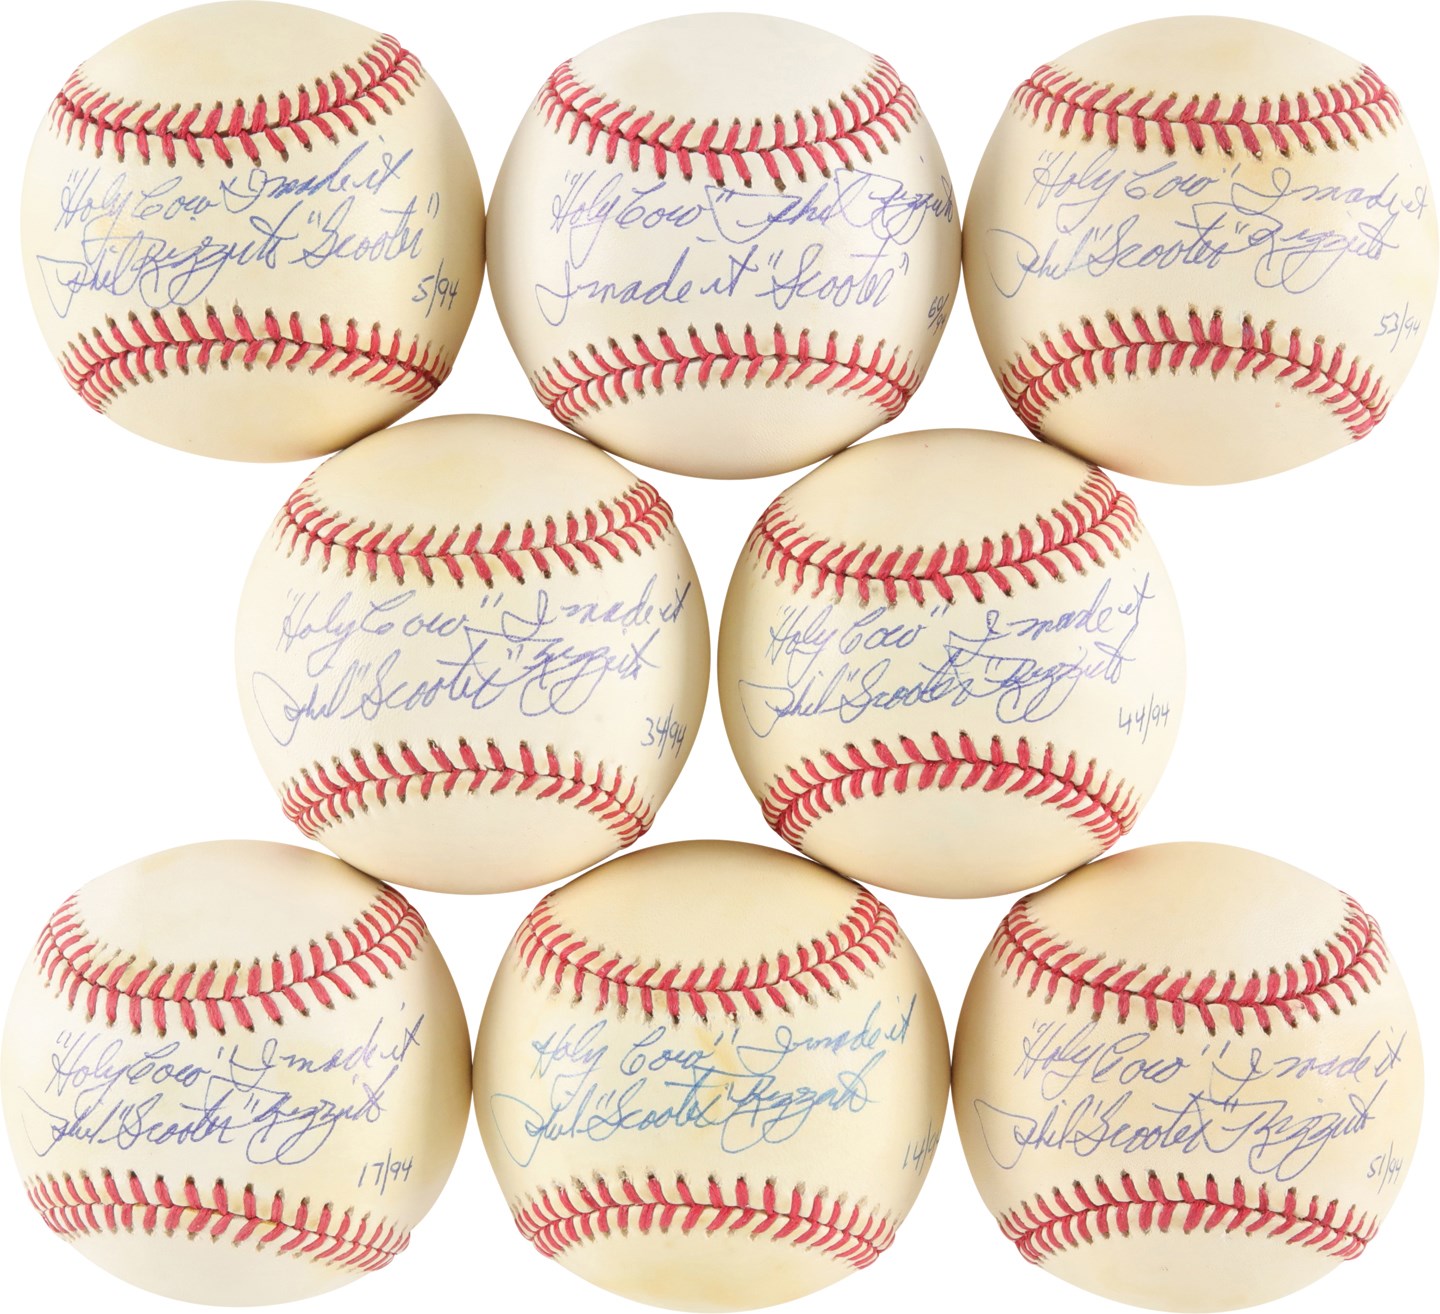 Baseball Autographs - Phil Rizzuto Limited Edition "Holy Cow I Made It" Signed Inscribed Baseballs (8)